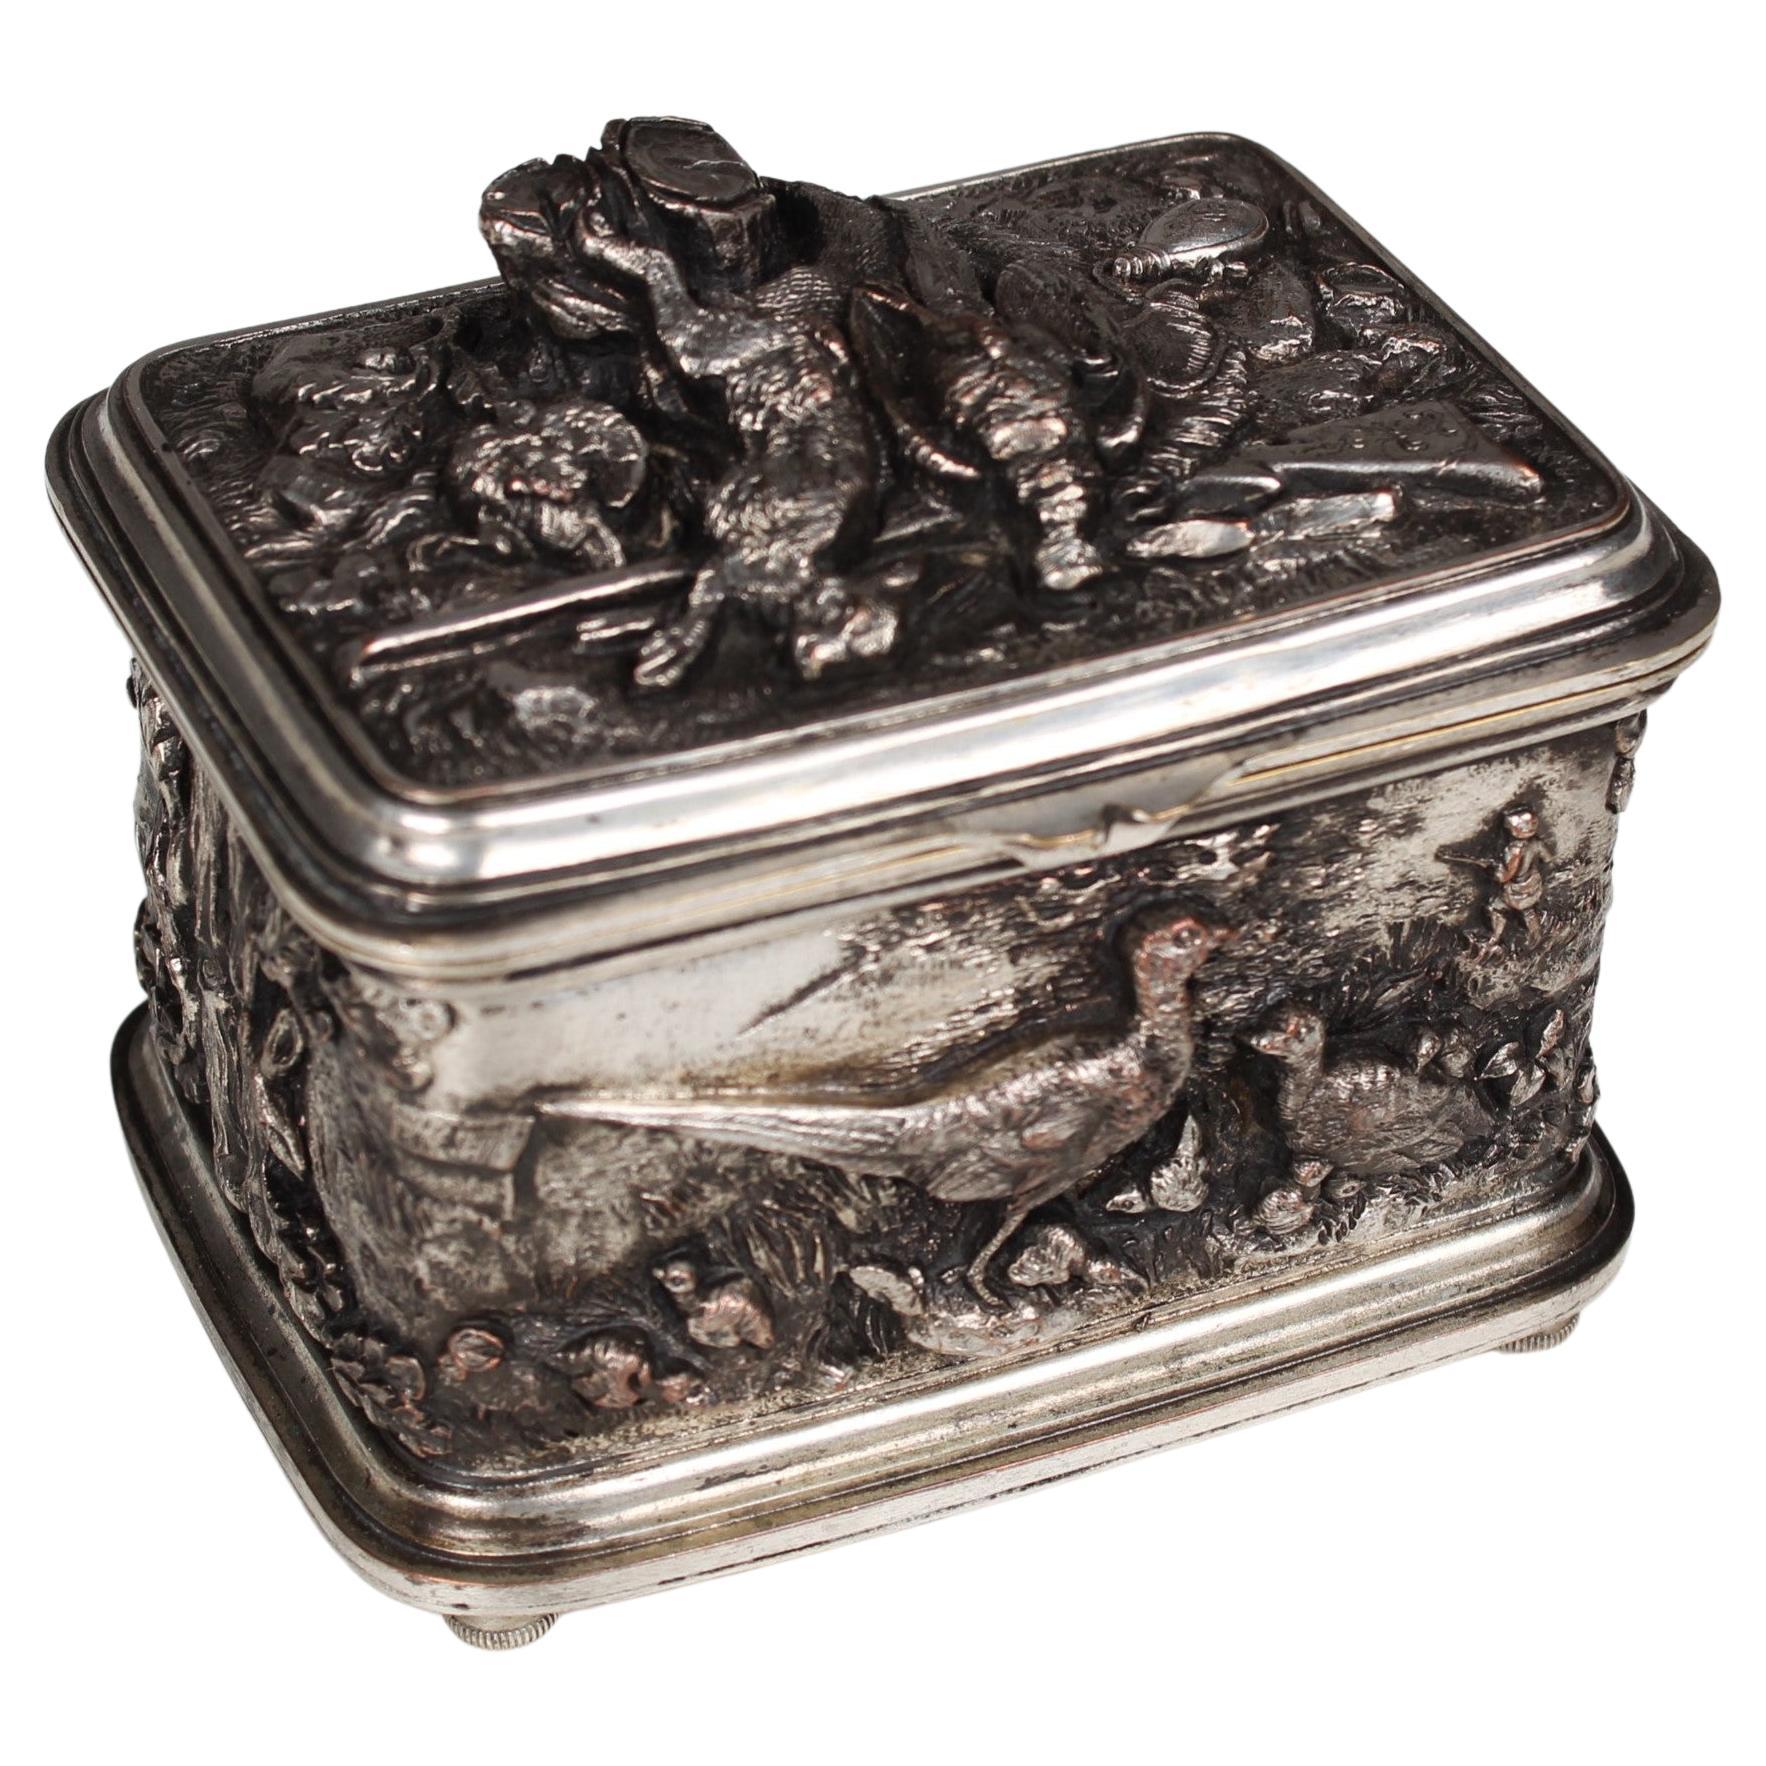 Antique Jewelry Box "The Hunt", 1910s, Silvered, Art Nouveau, Iron Craftmanship For Sale